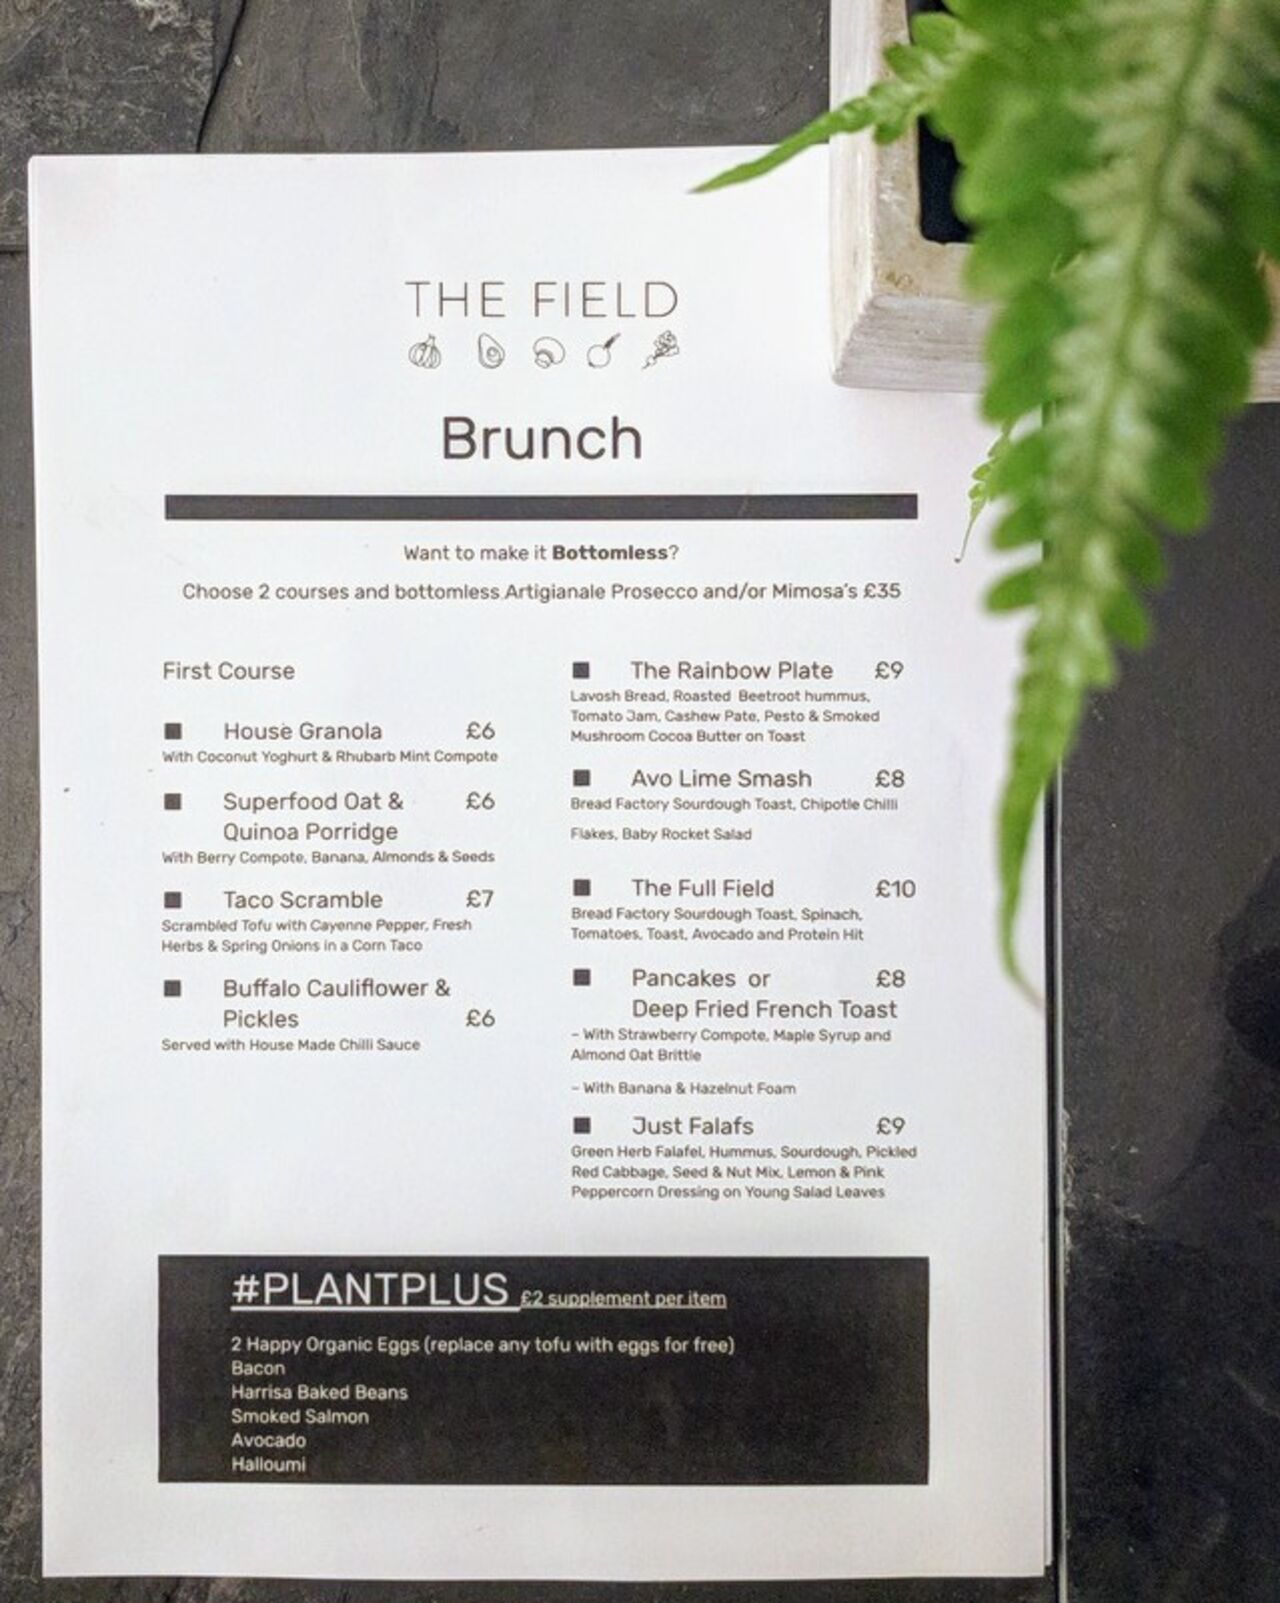 A photo of The Field Restaurant